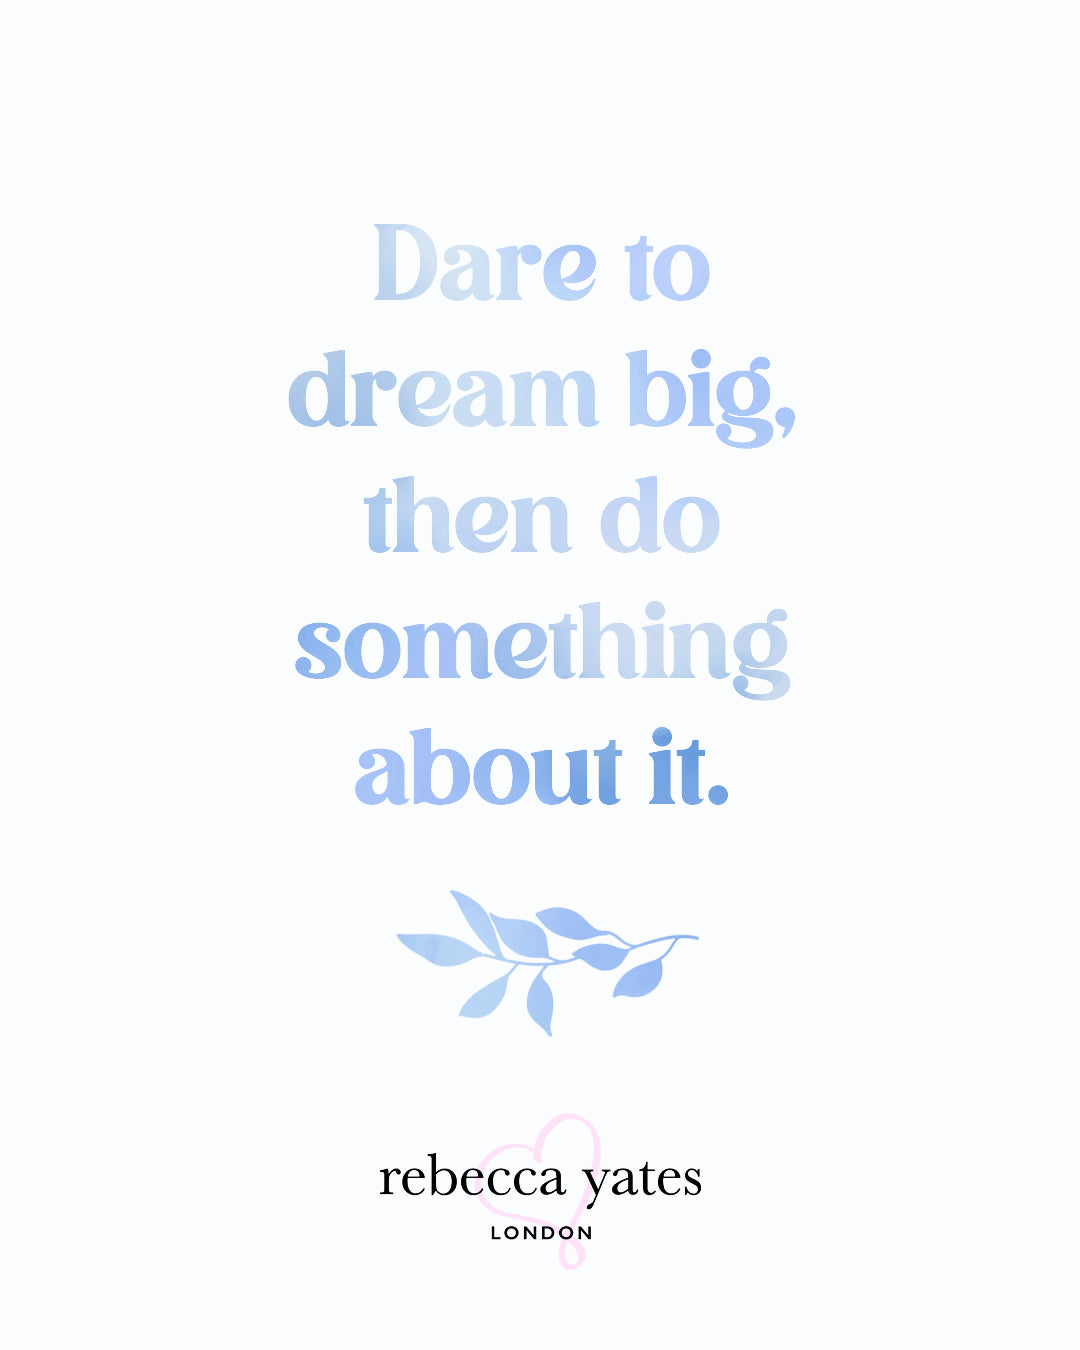 10 POWERFUL QUOTES ABOUT DREAMING BIG